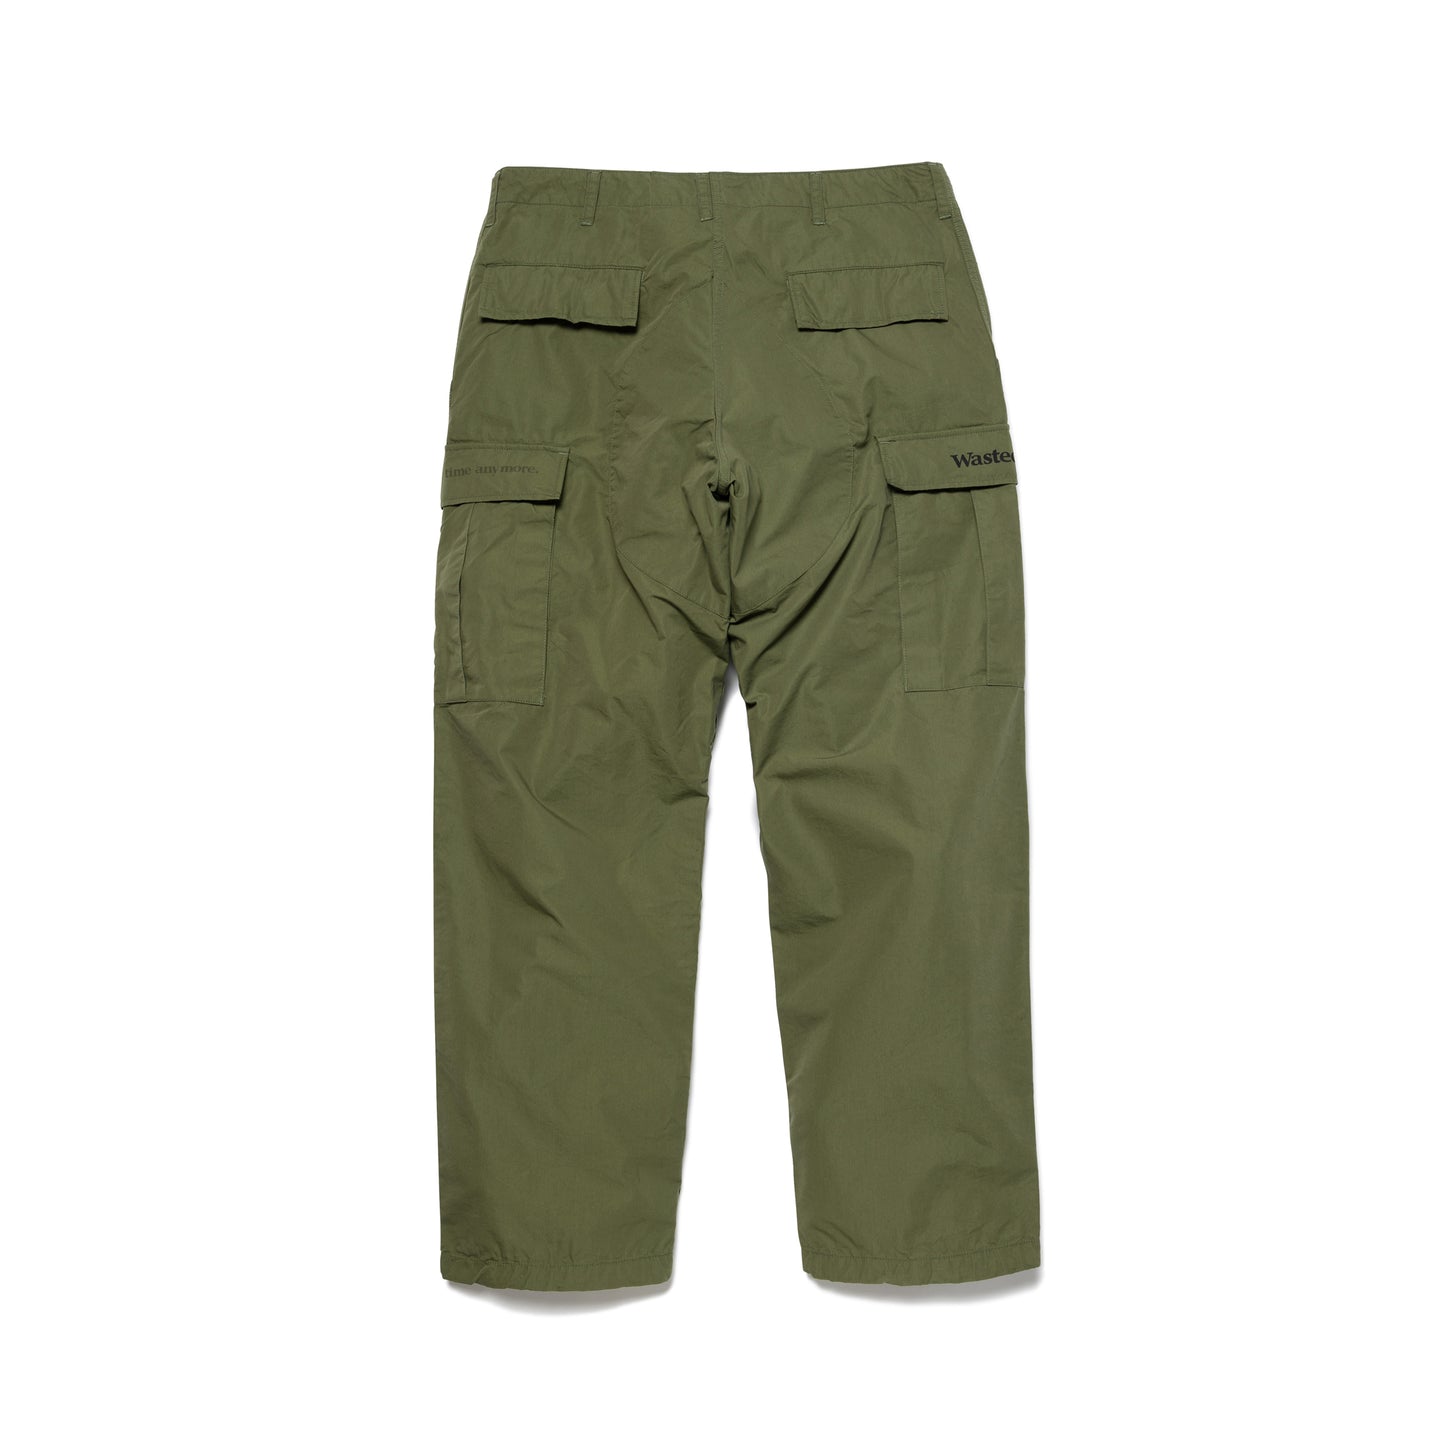 Wasted Youth CARGO PANTS OD-B